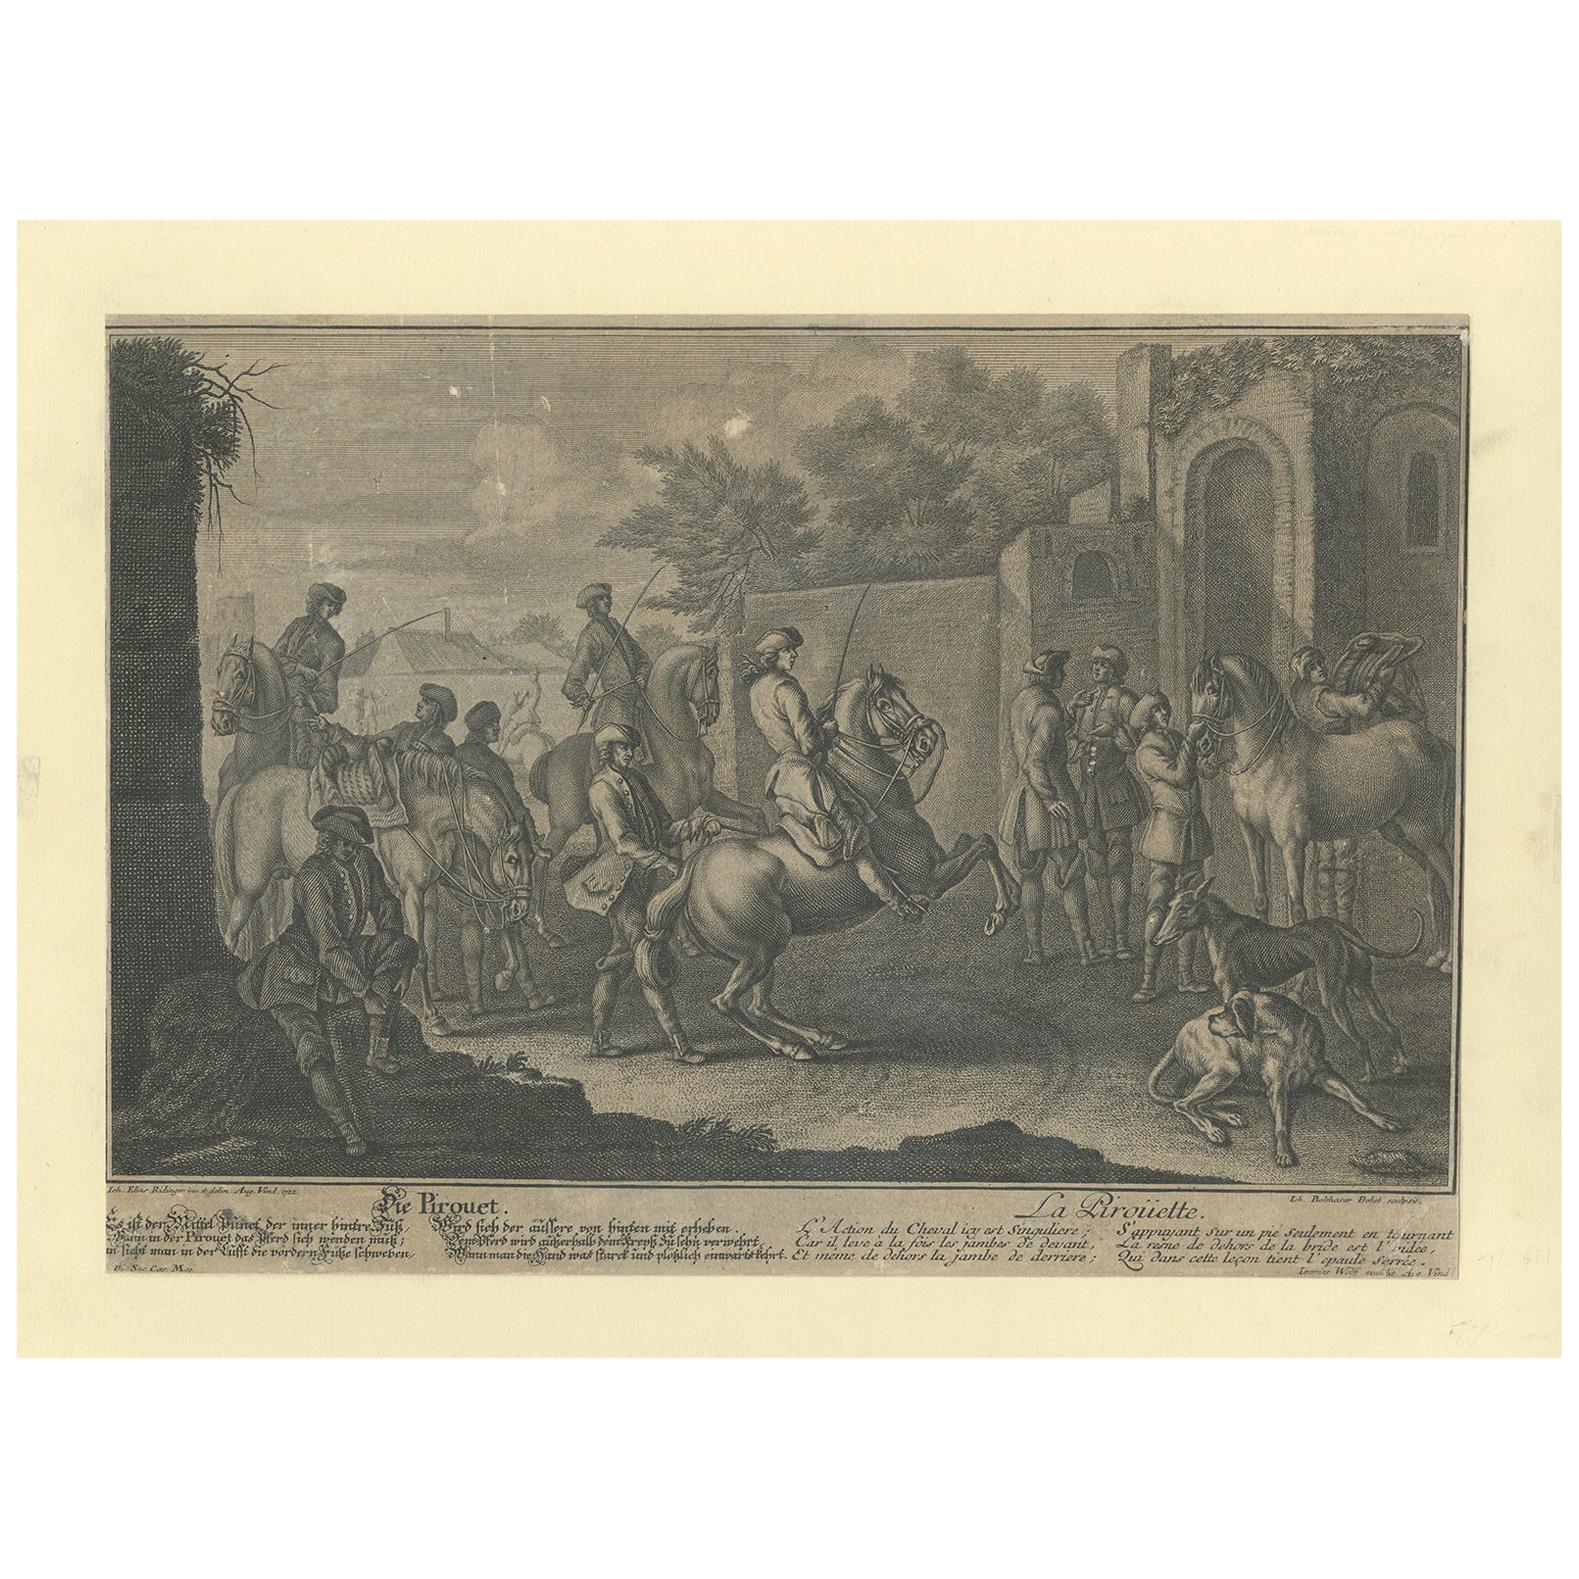 Antique Horse Print of a 'Pirouet' by Ridinger '1722'